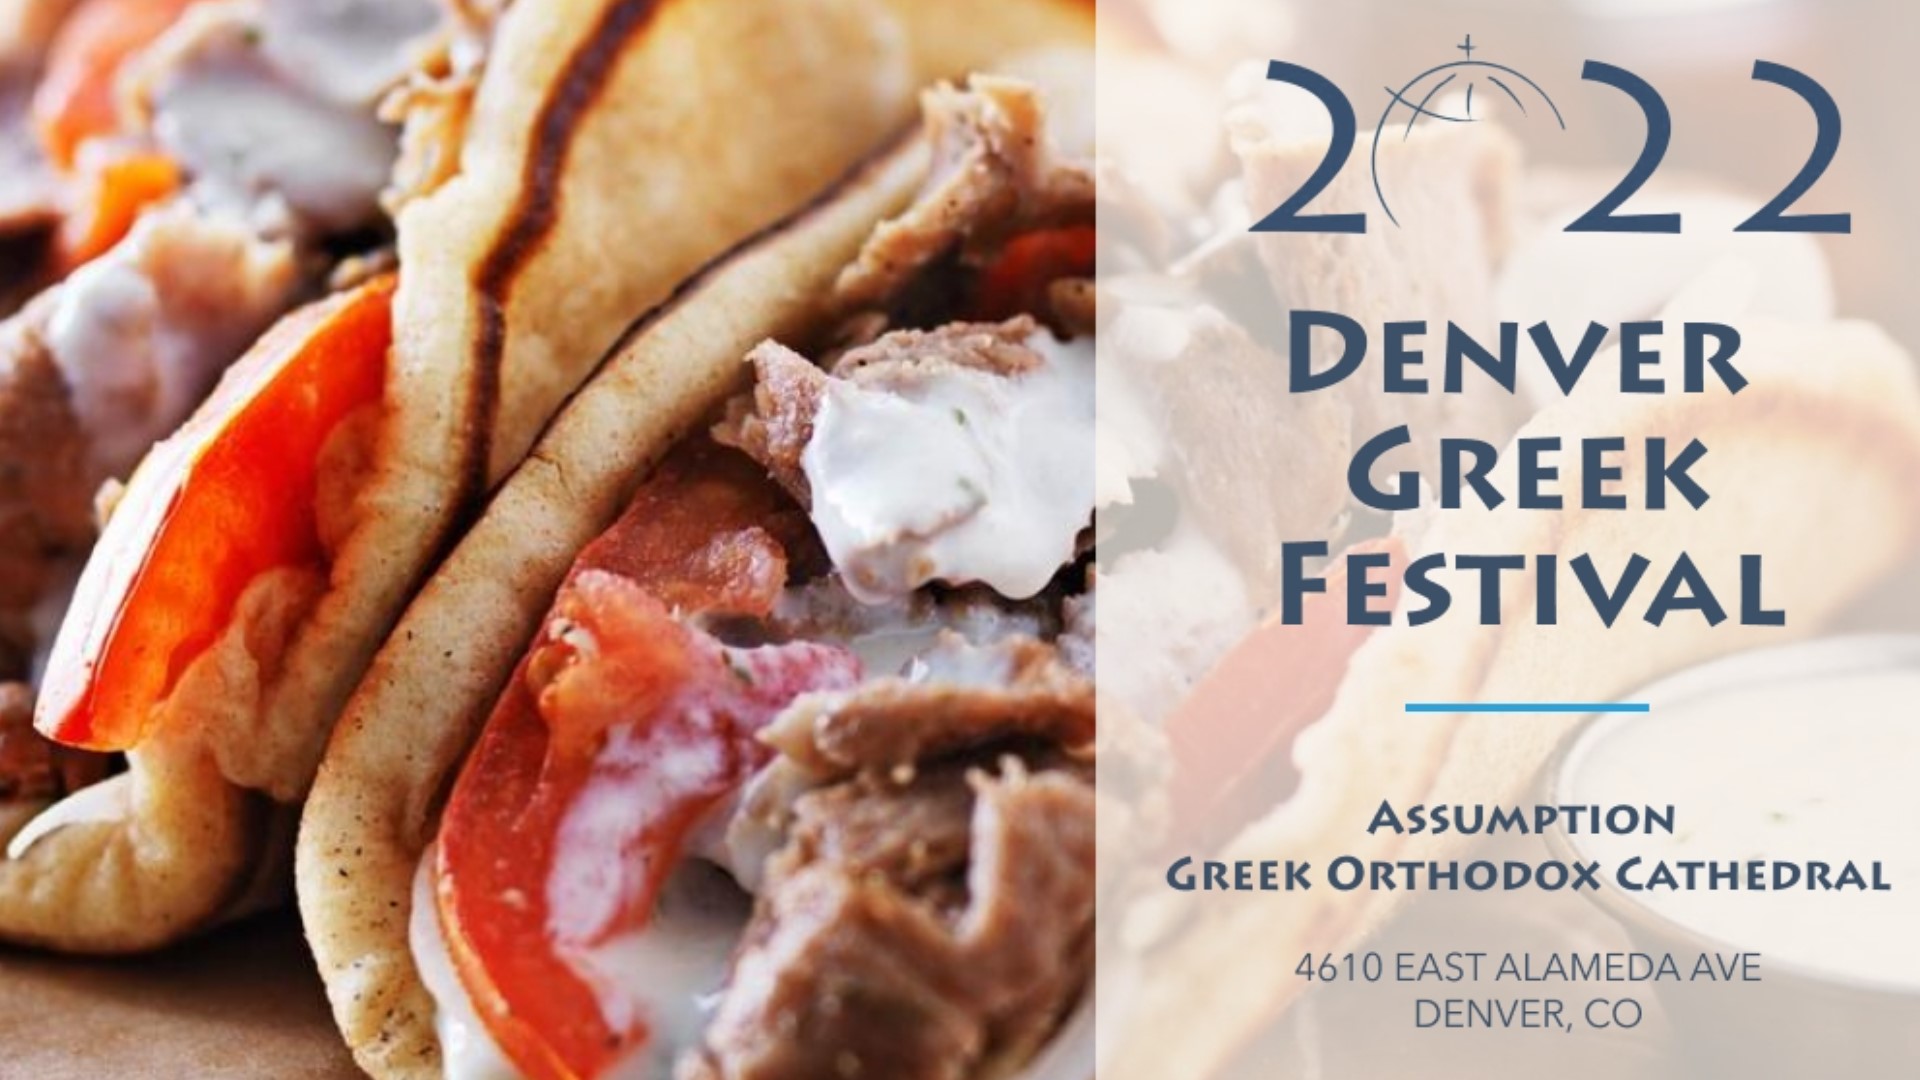 Denver Greek Festival celebrates authentic Greek food along with the sounds of live Greek music and traditional dance entertainment.